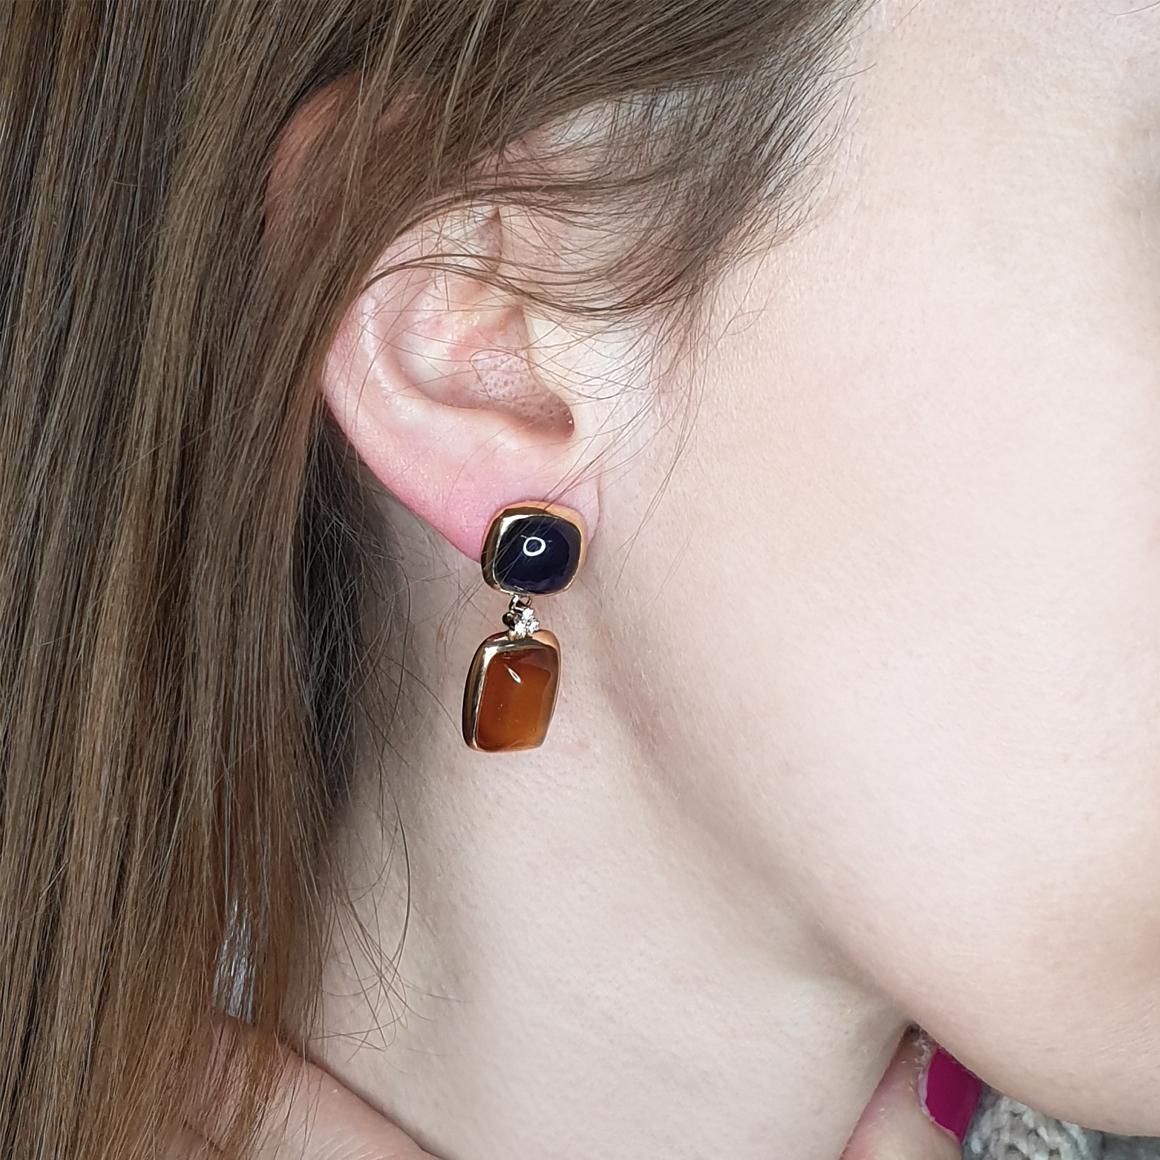 Trendy earrings in rose gold 18 Karat with Iolite square cut (size stone: 10x10 mm, h 7 mm), garnet essonite rettangular cut (size: 10x14) and Diamonds ct 0.12 VS colour G/H.   g.11.20
This earring is part of the collection 